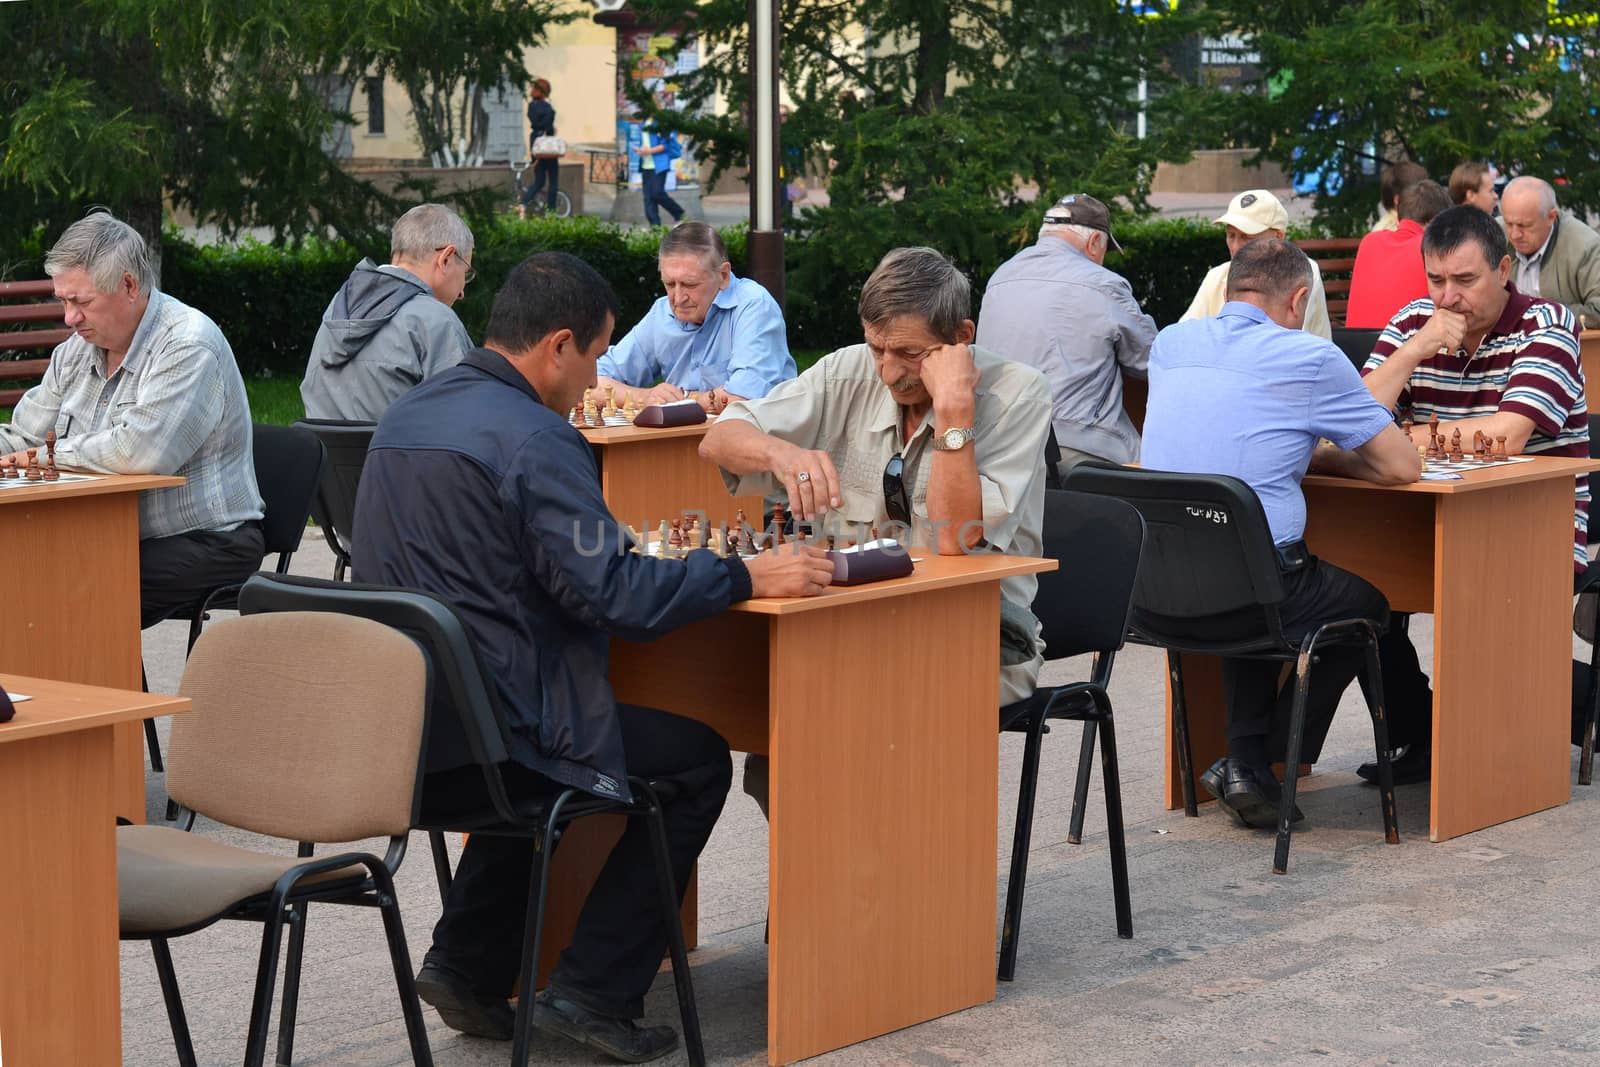 Chess tournament on the street in the summer